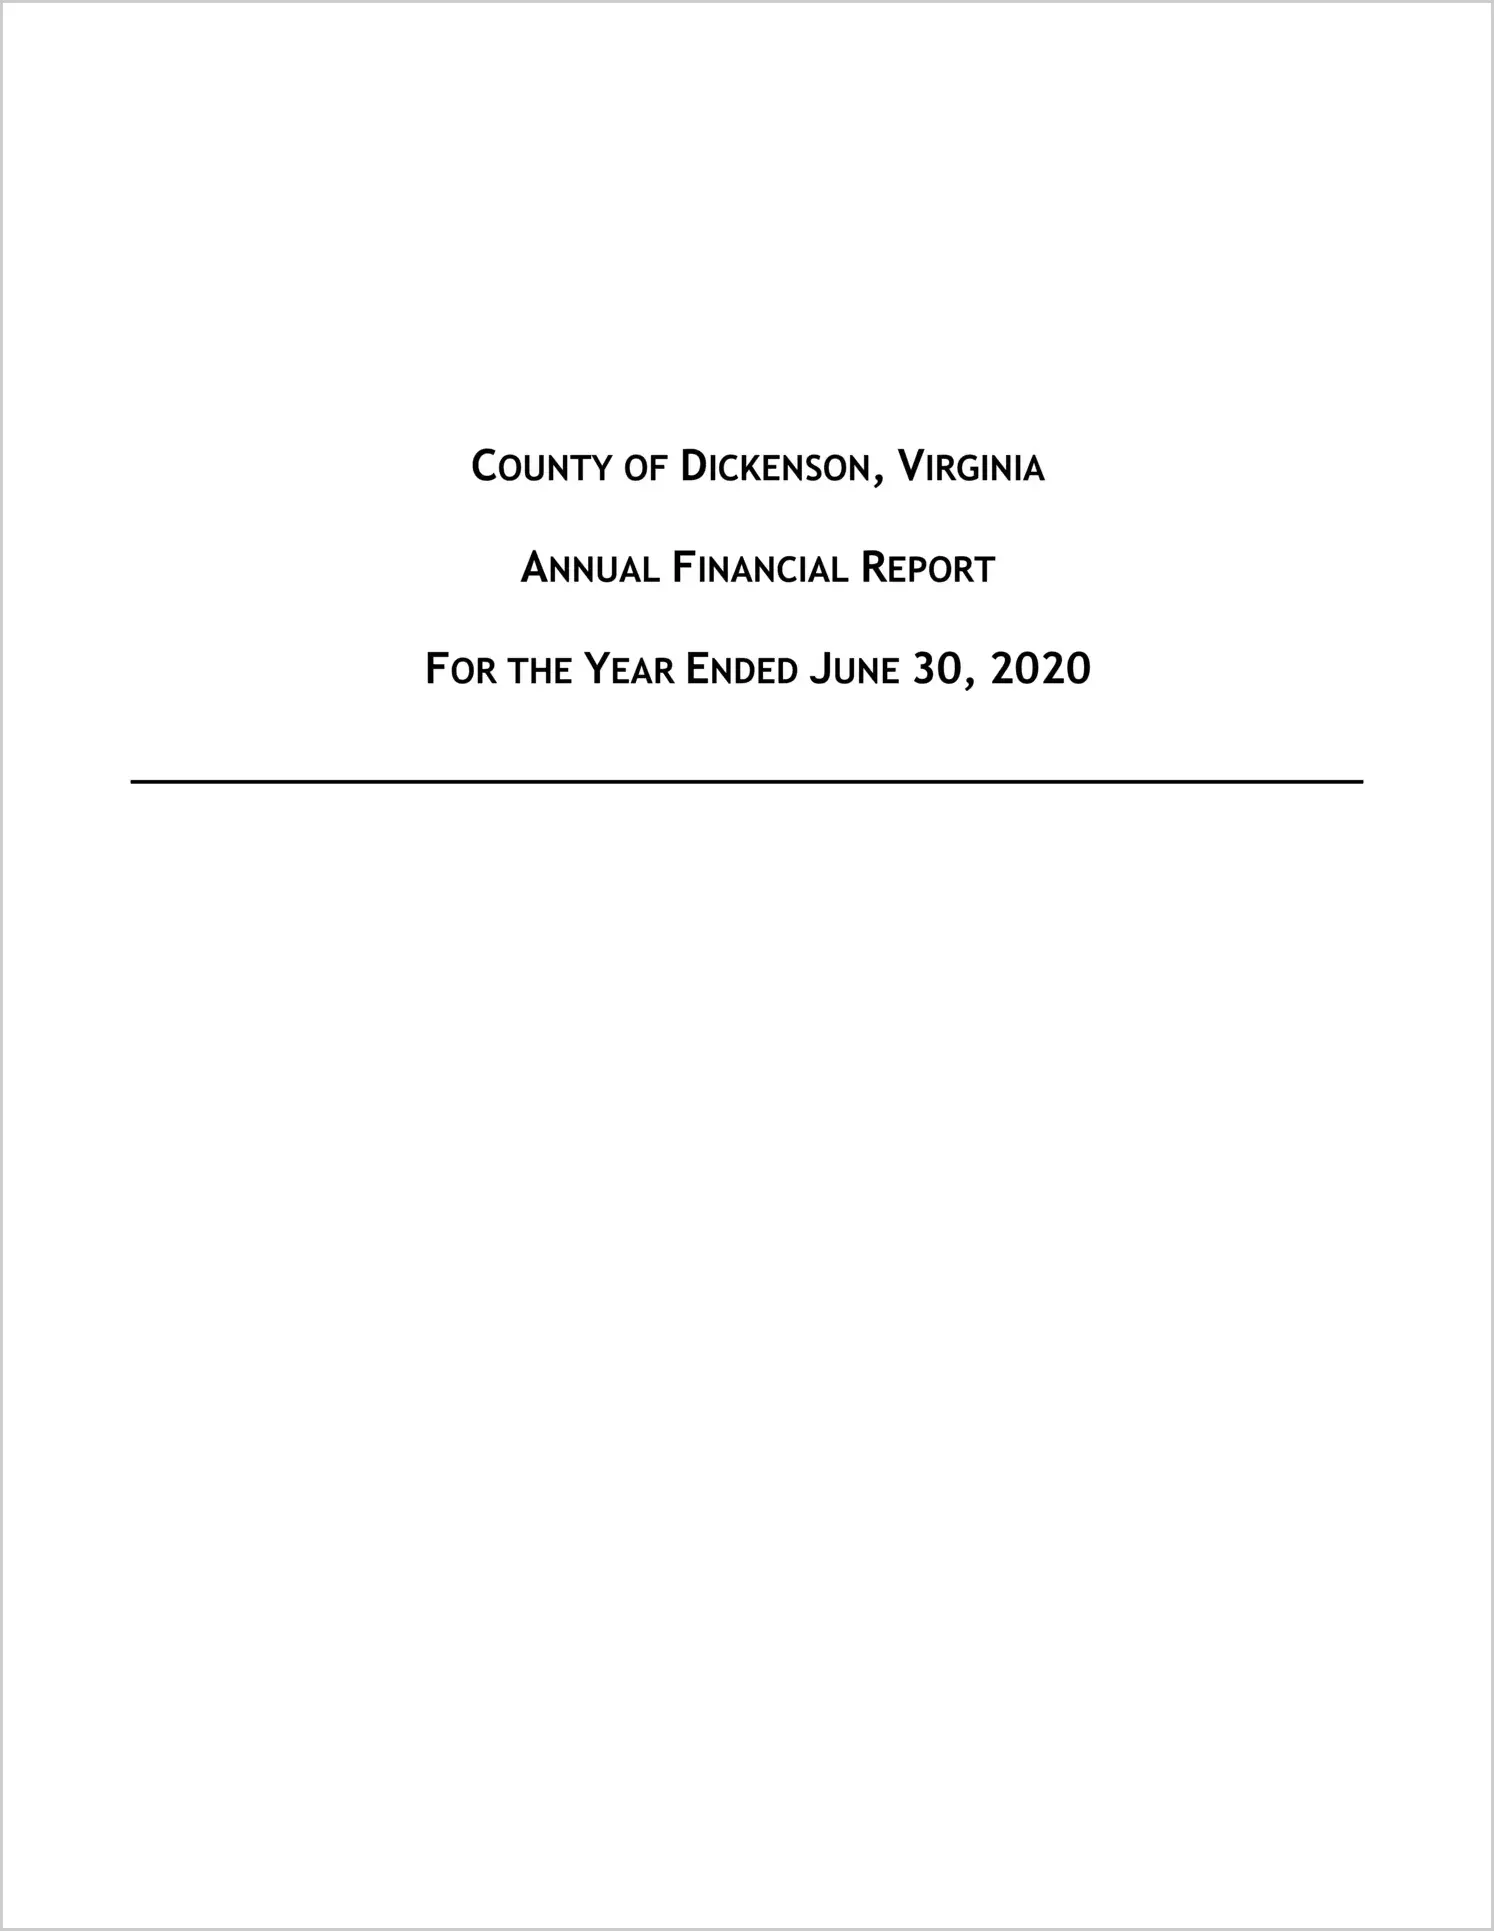 2020 Annual Financial Report for County of Dickenson